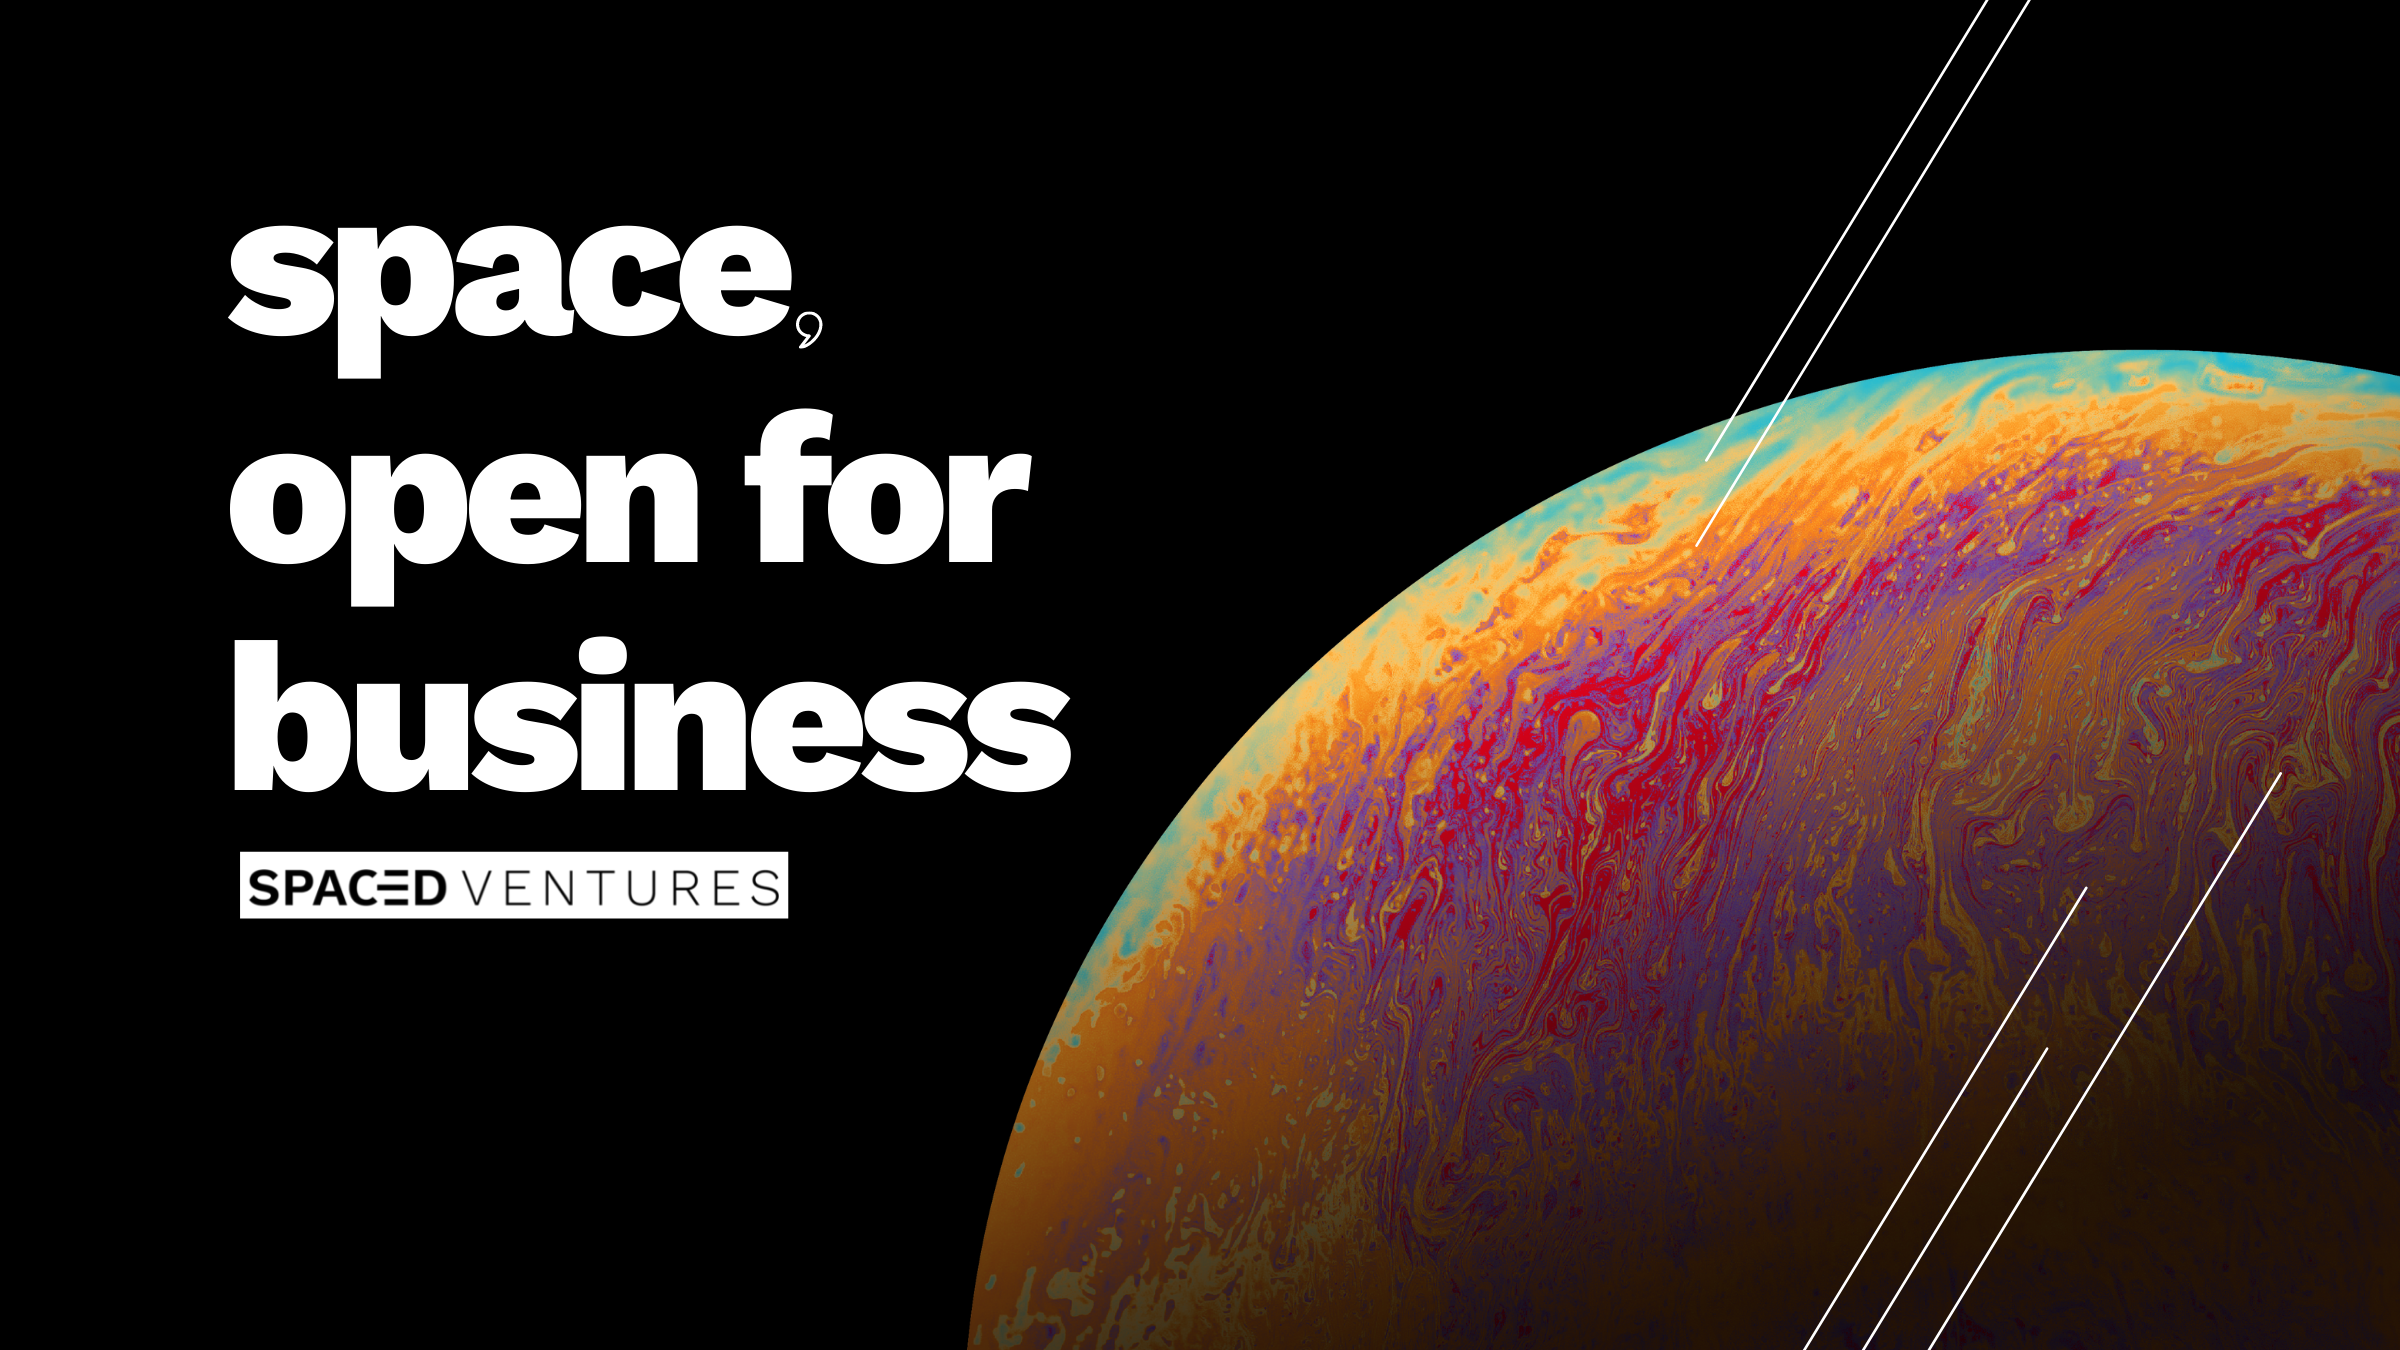 image of colorful planet on black background, with Spaced Ventures logo and phrase "Space, open for business" in white text